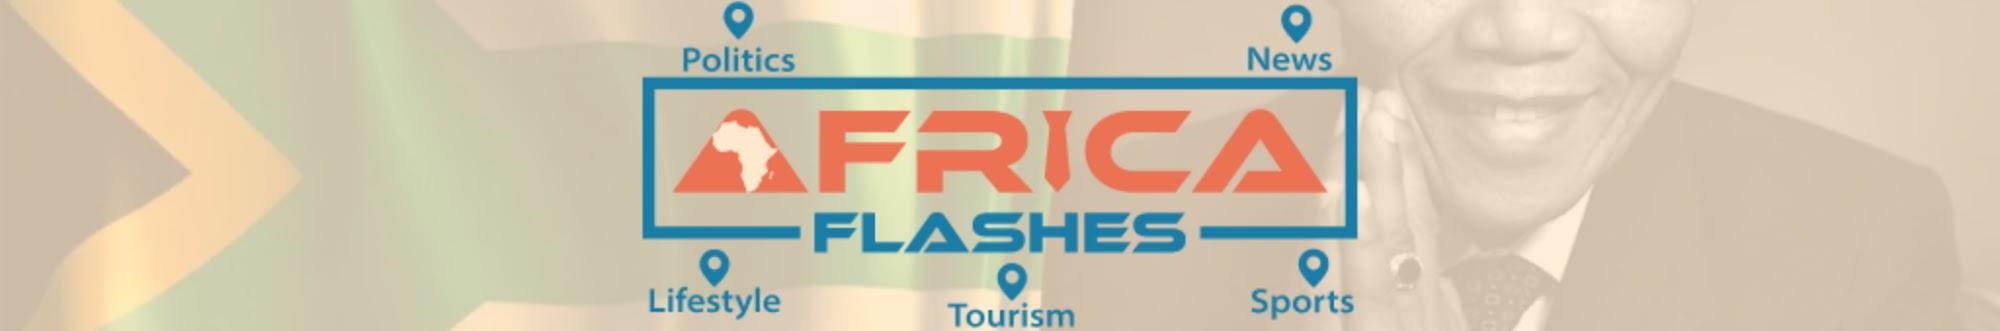 Africa Flashes